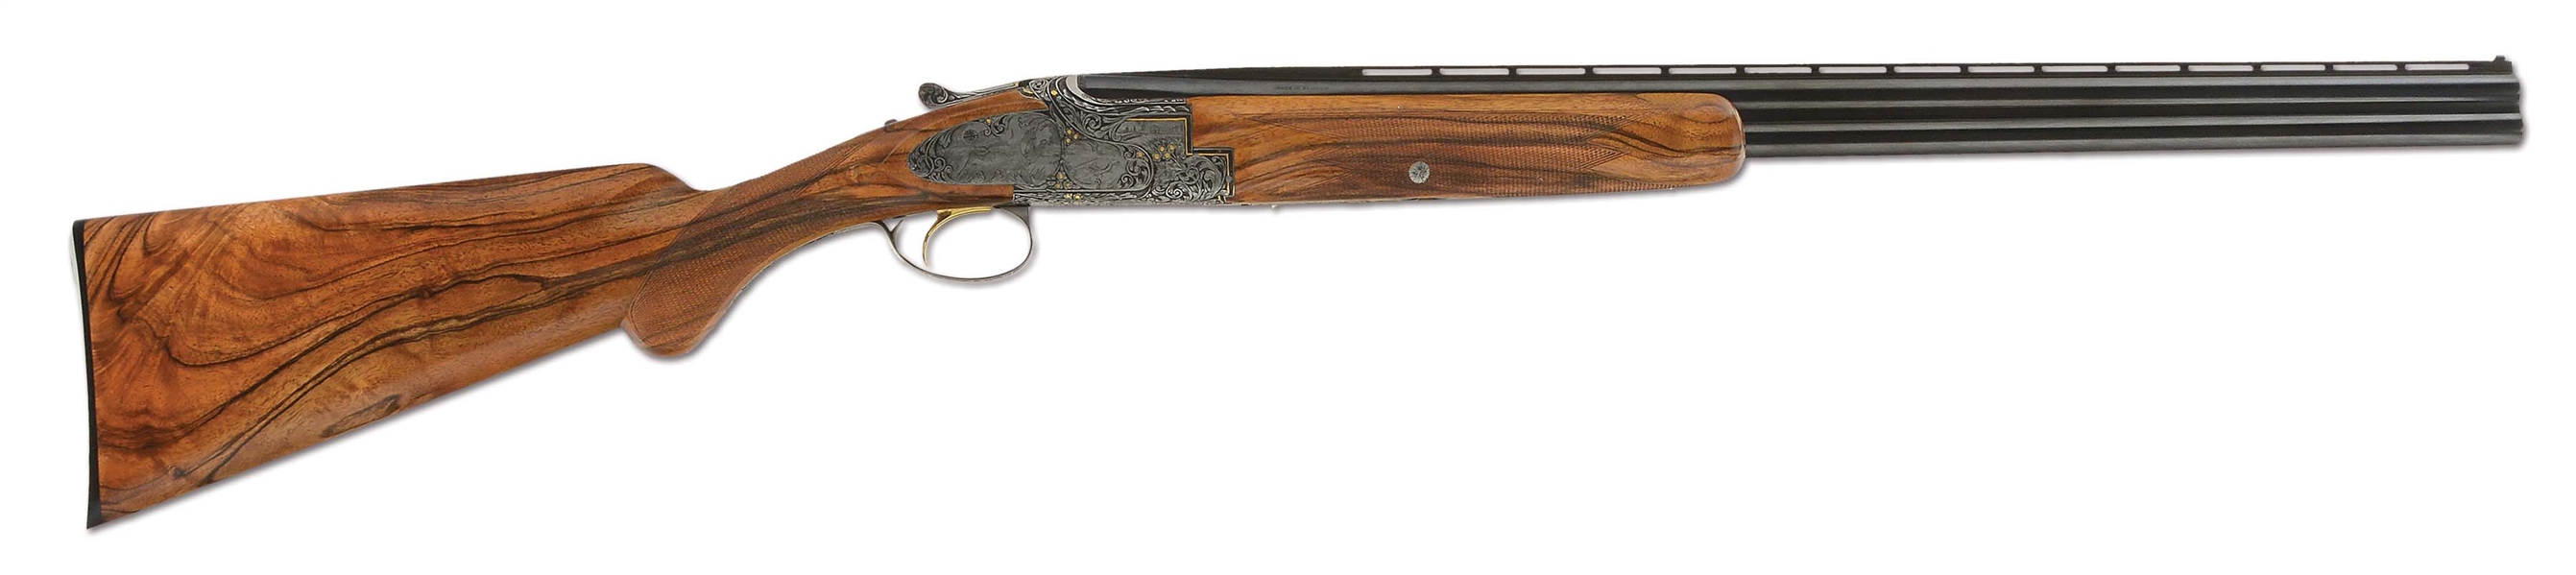 (C) CUSTOMIZED BROWNING SUPERPOSED 20 GAUGE OVER-UNDER SHOTGUN WITH RELIEF ENGRAVING AND GOLD INLAY BY RON REIMER (1961).